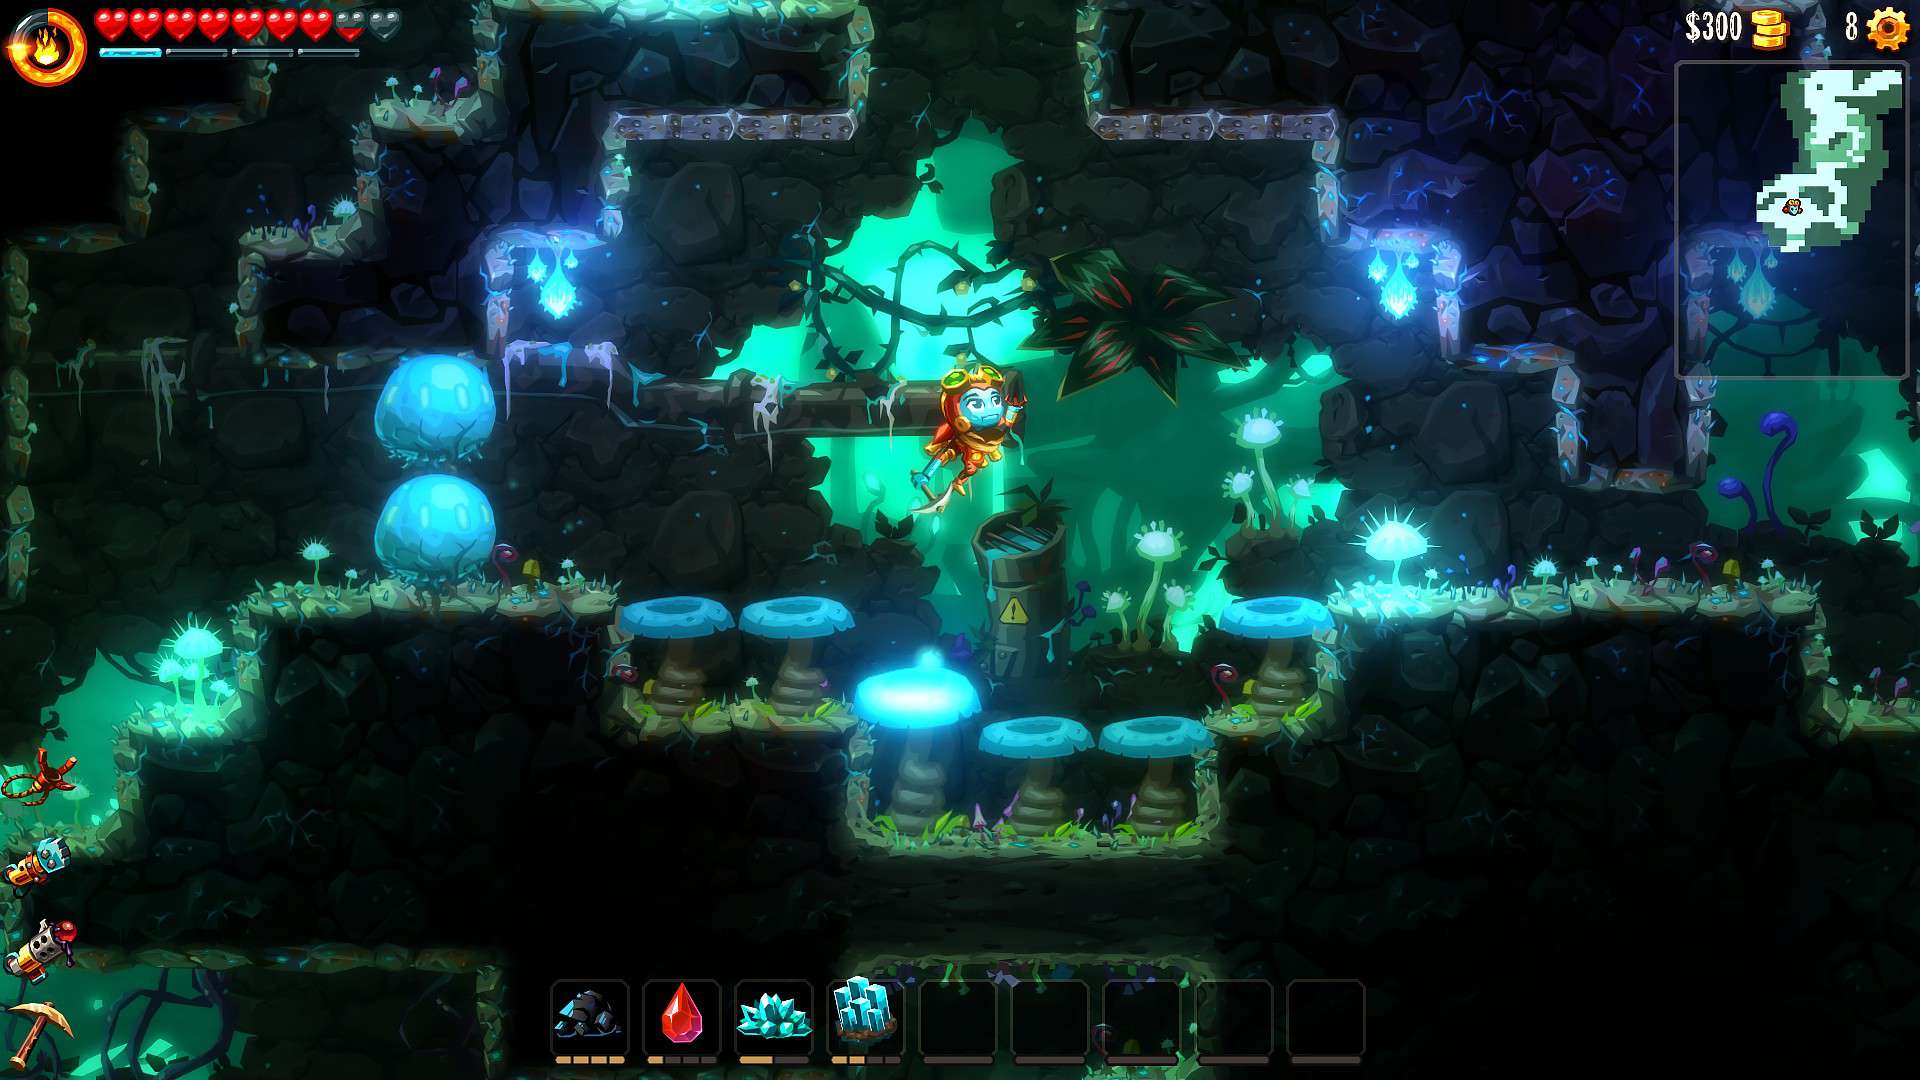 Graphics in SteamWorld Dig 2.